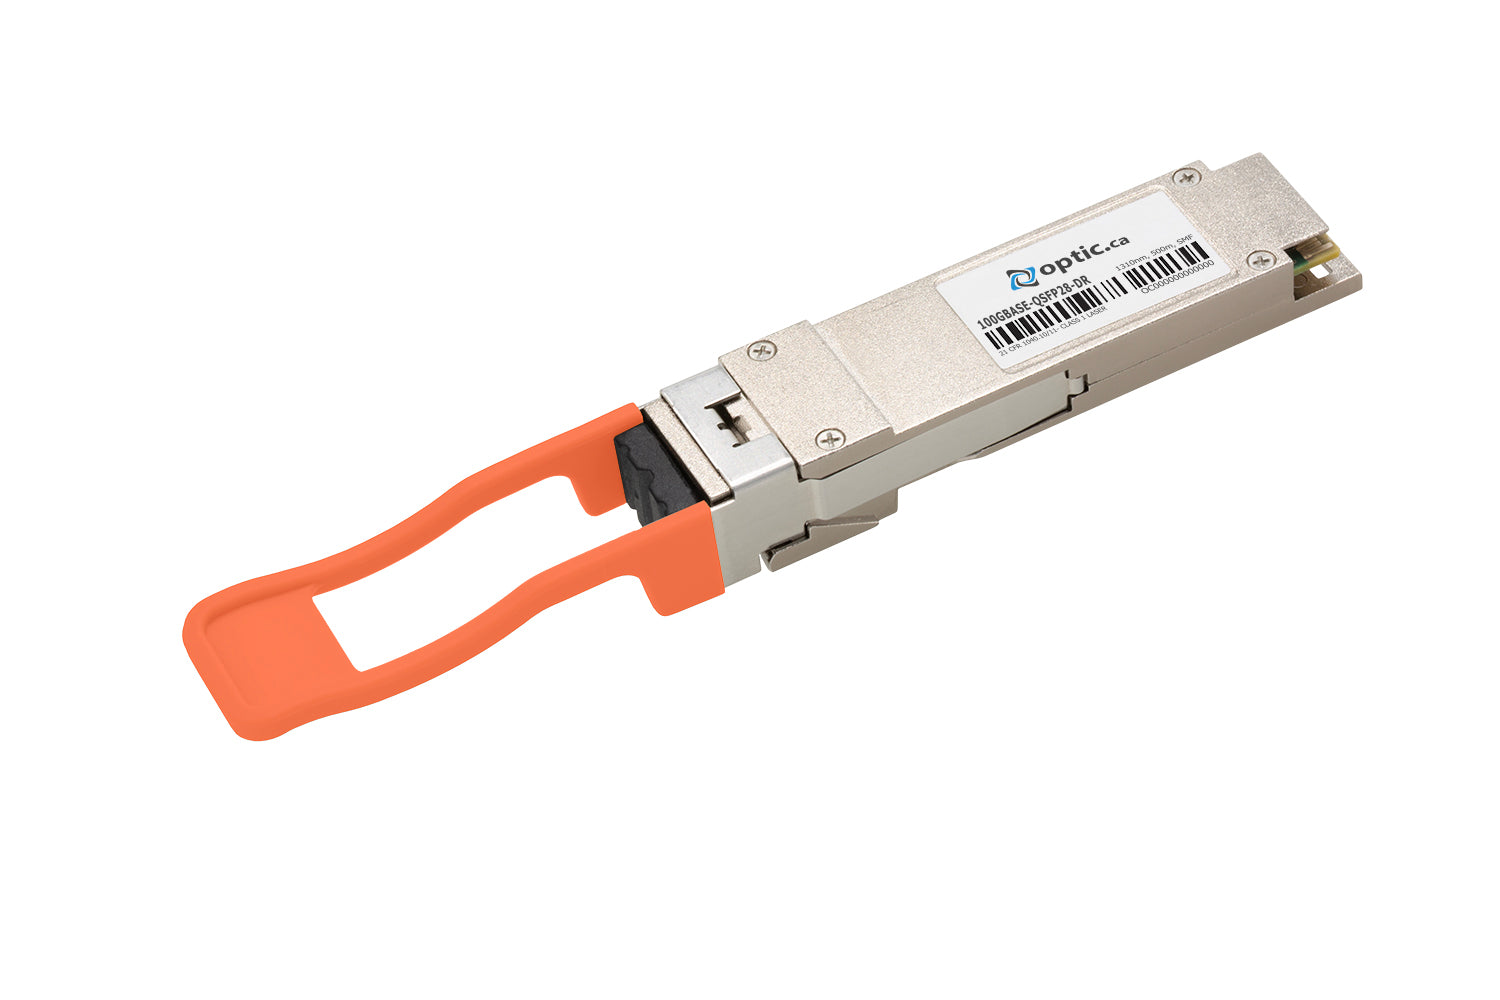 OPTIC.CA - 100GBASE-DR1 QSFP28 - Q28-511T-OC - GIGAMON COMPATIBLE